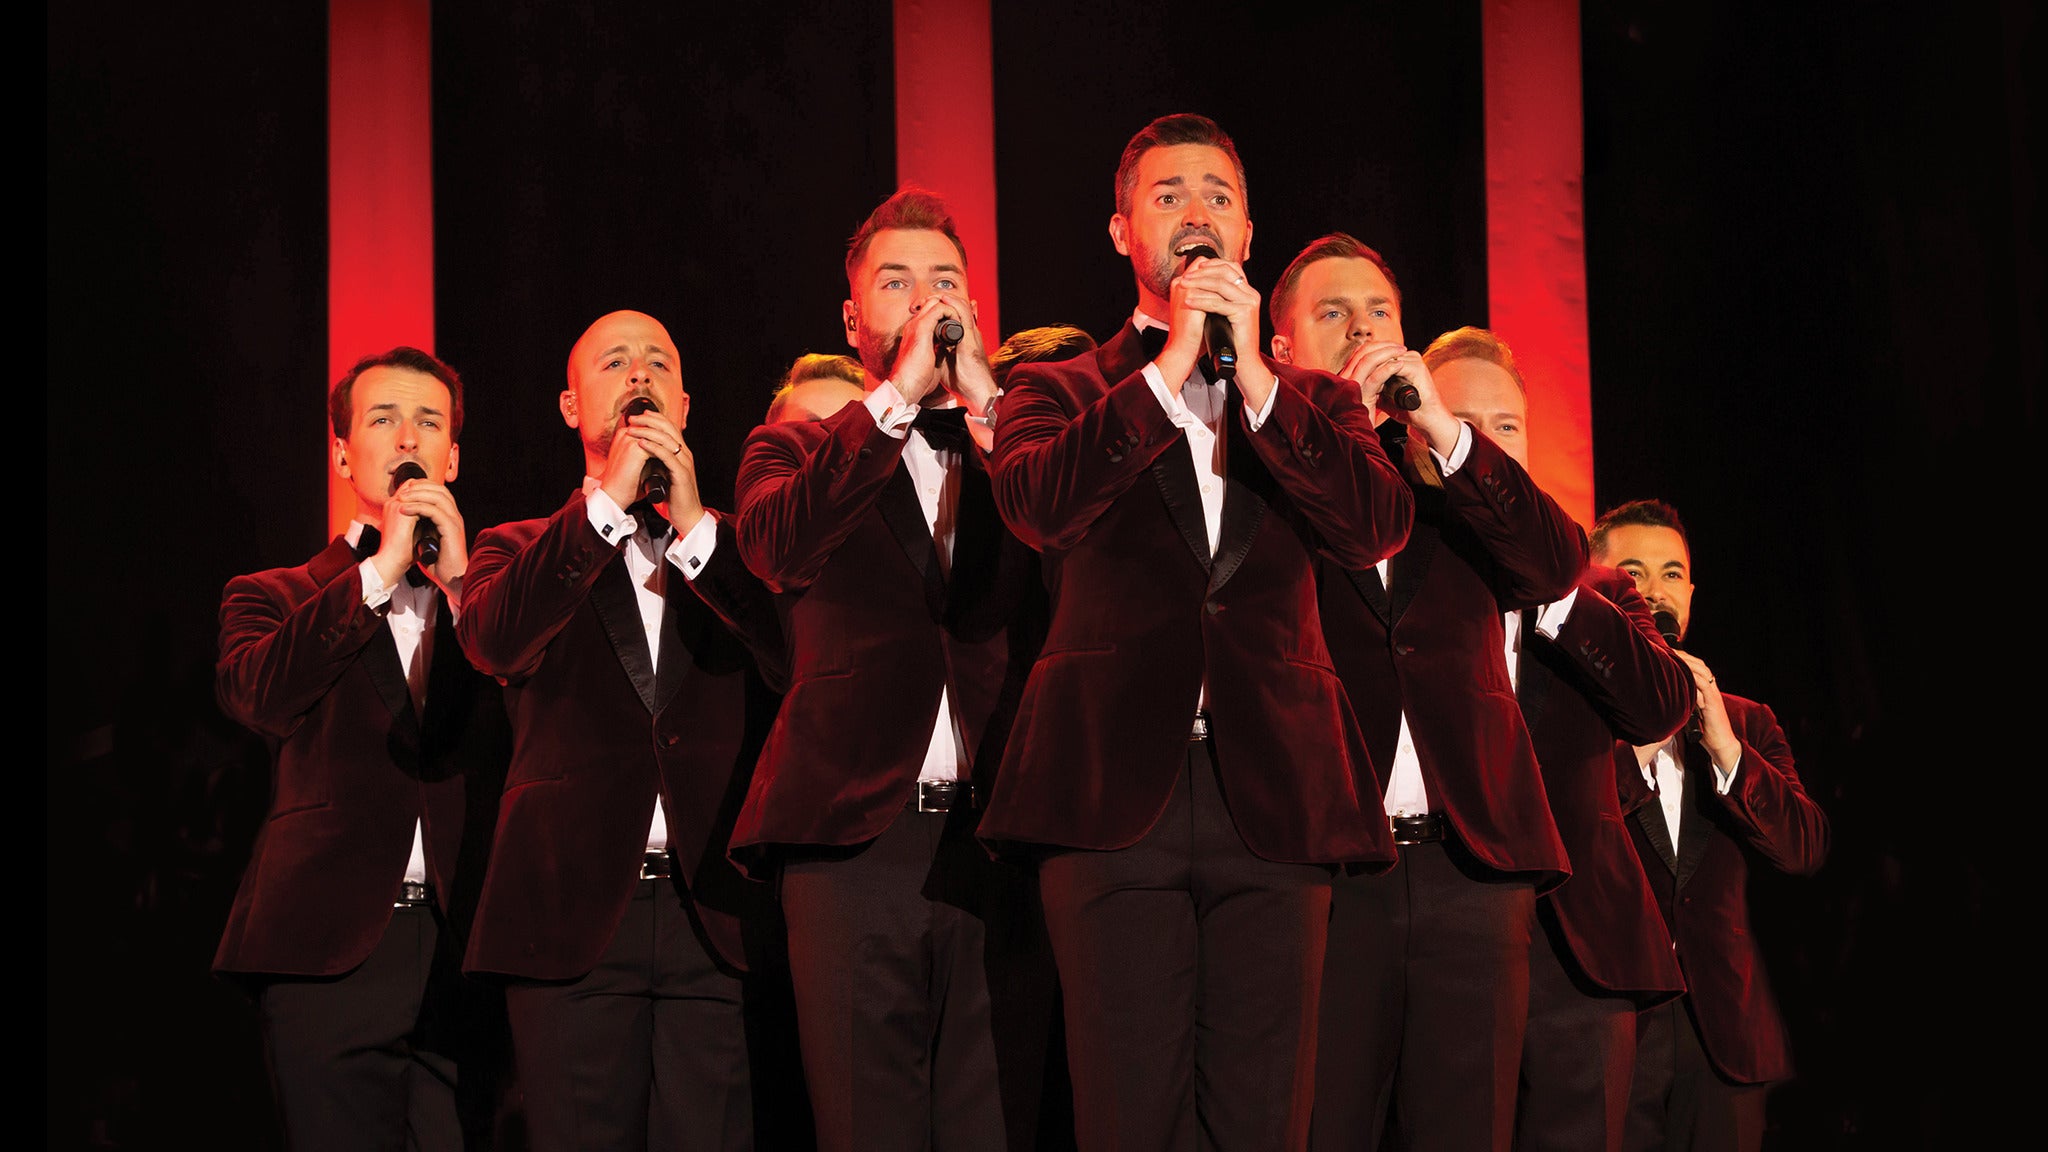 Image used with permission from Ticketmaster | The Ten Tenors - Home For Christmas tickets